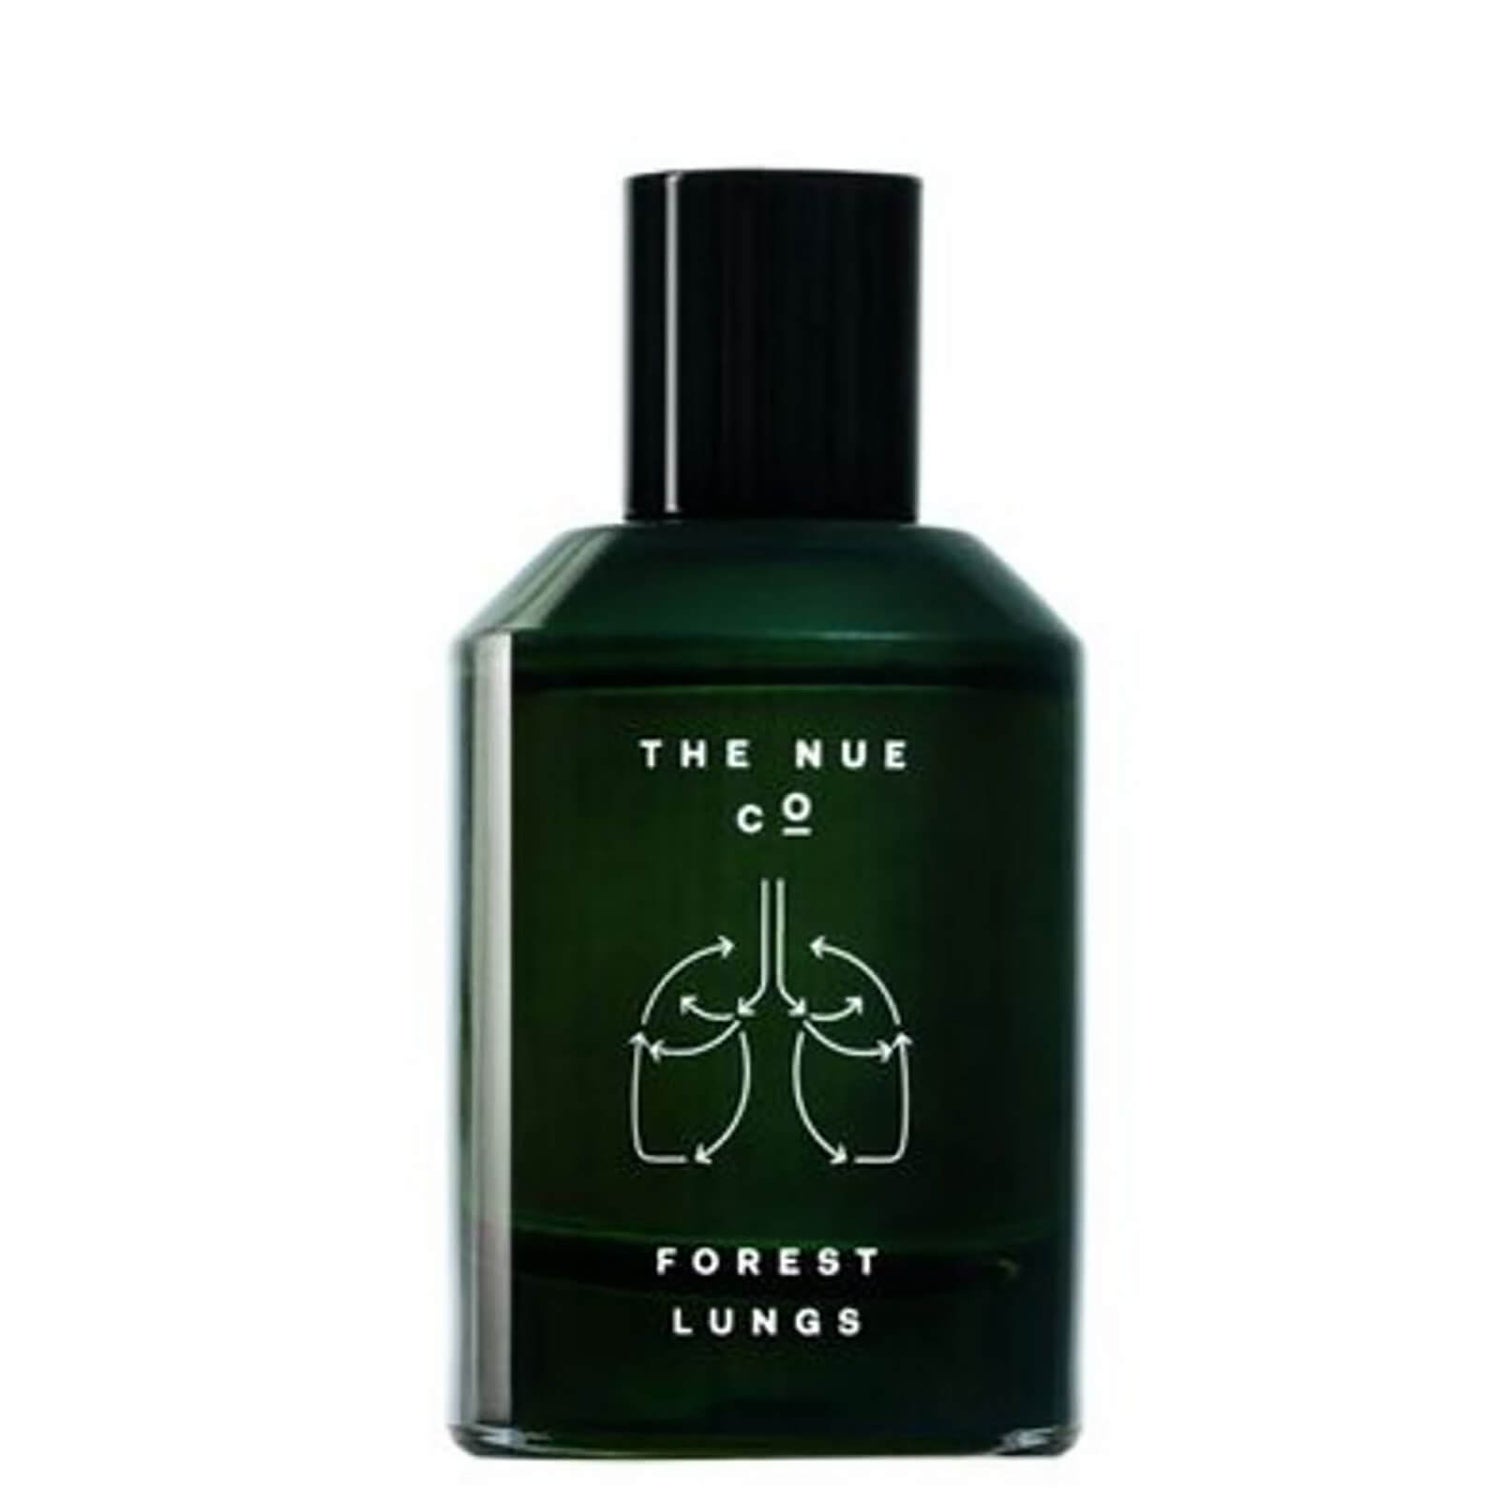 The Nue Co. Forest Lungs 50 ml.